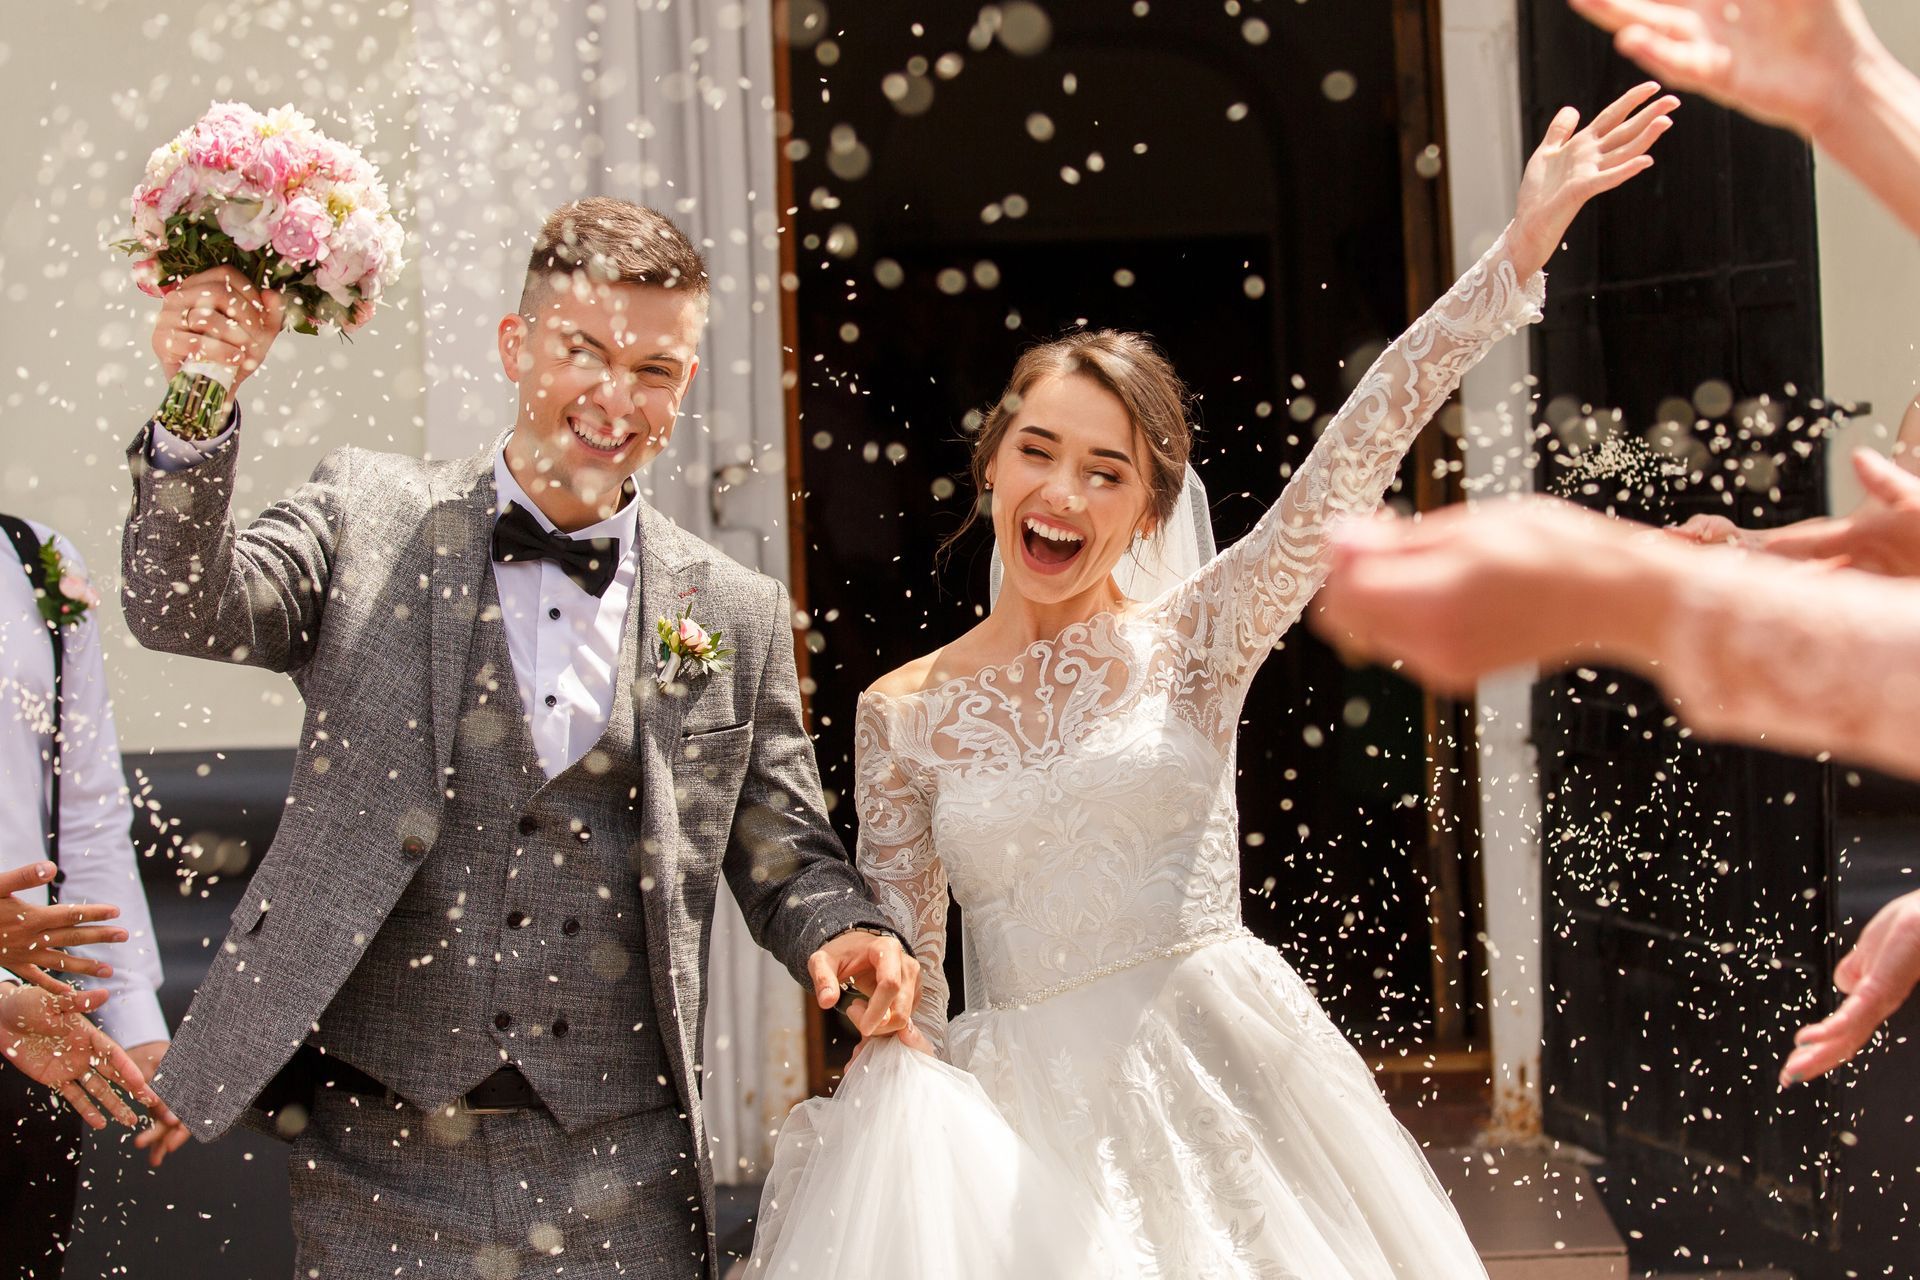 What Happens During a Traditional American Wedding?